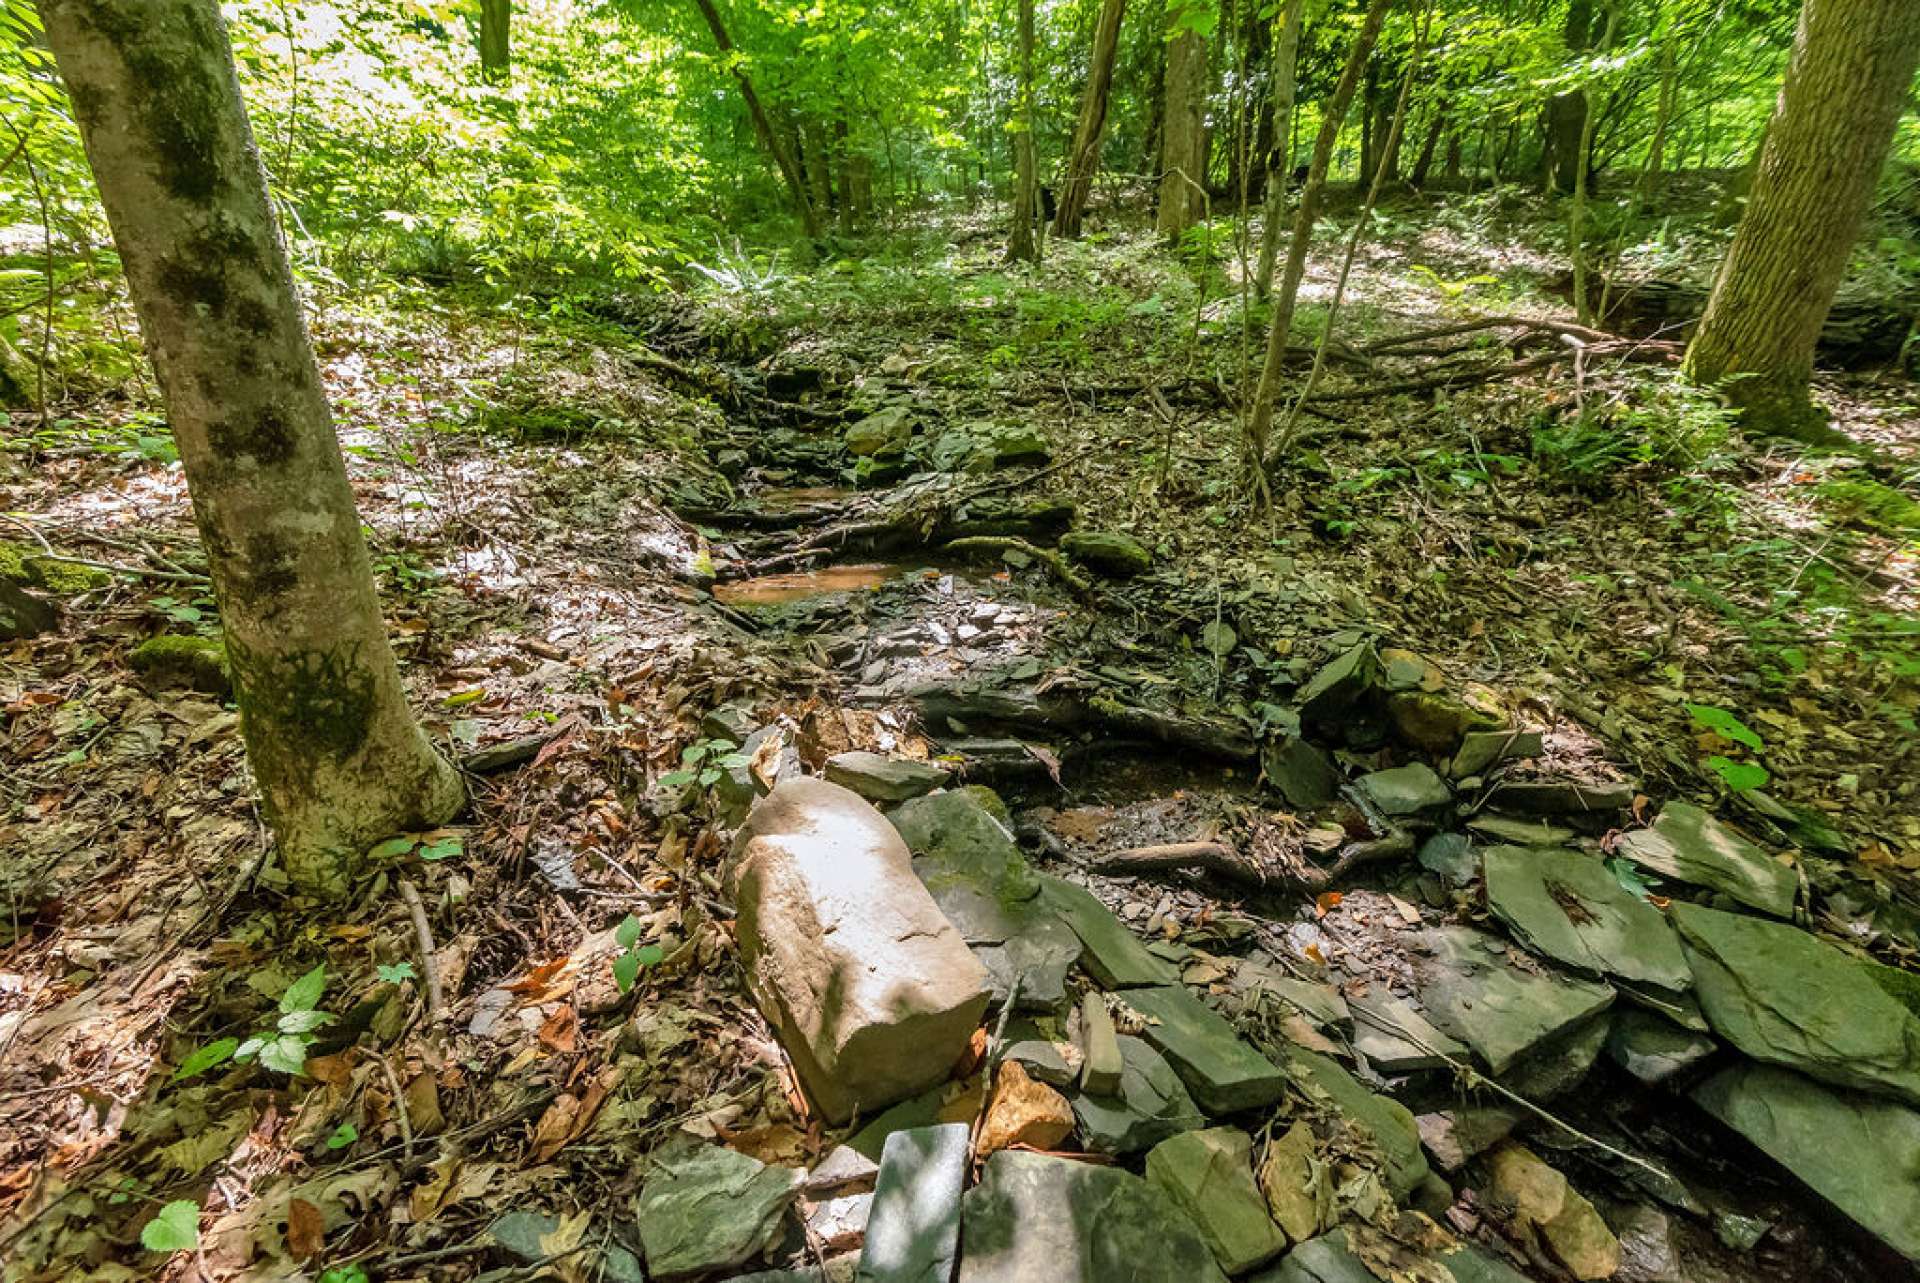 This property is surrounded by 3 creeks and has small streams throughout.